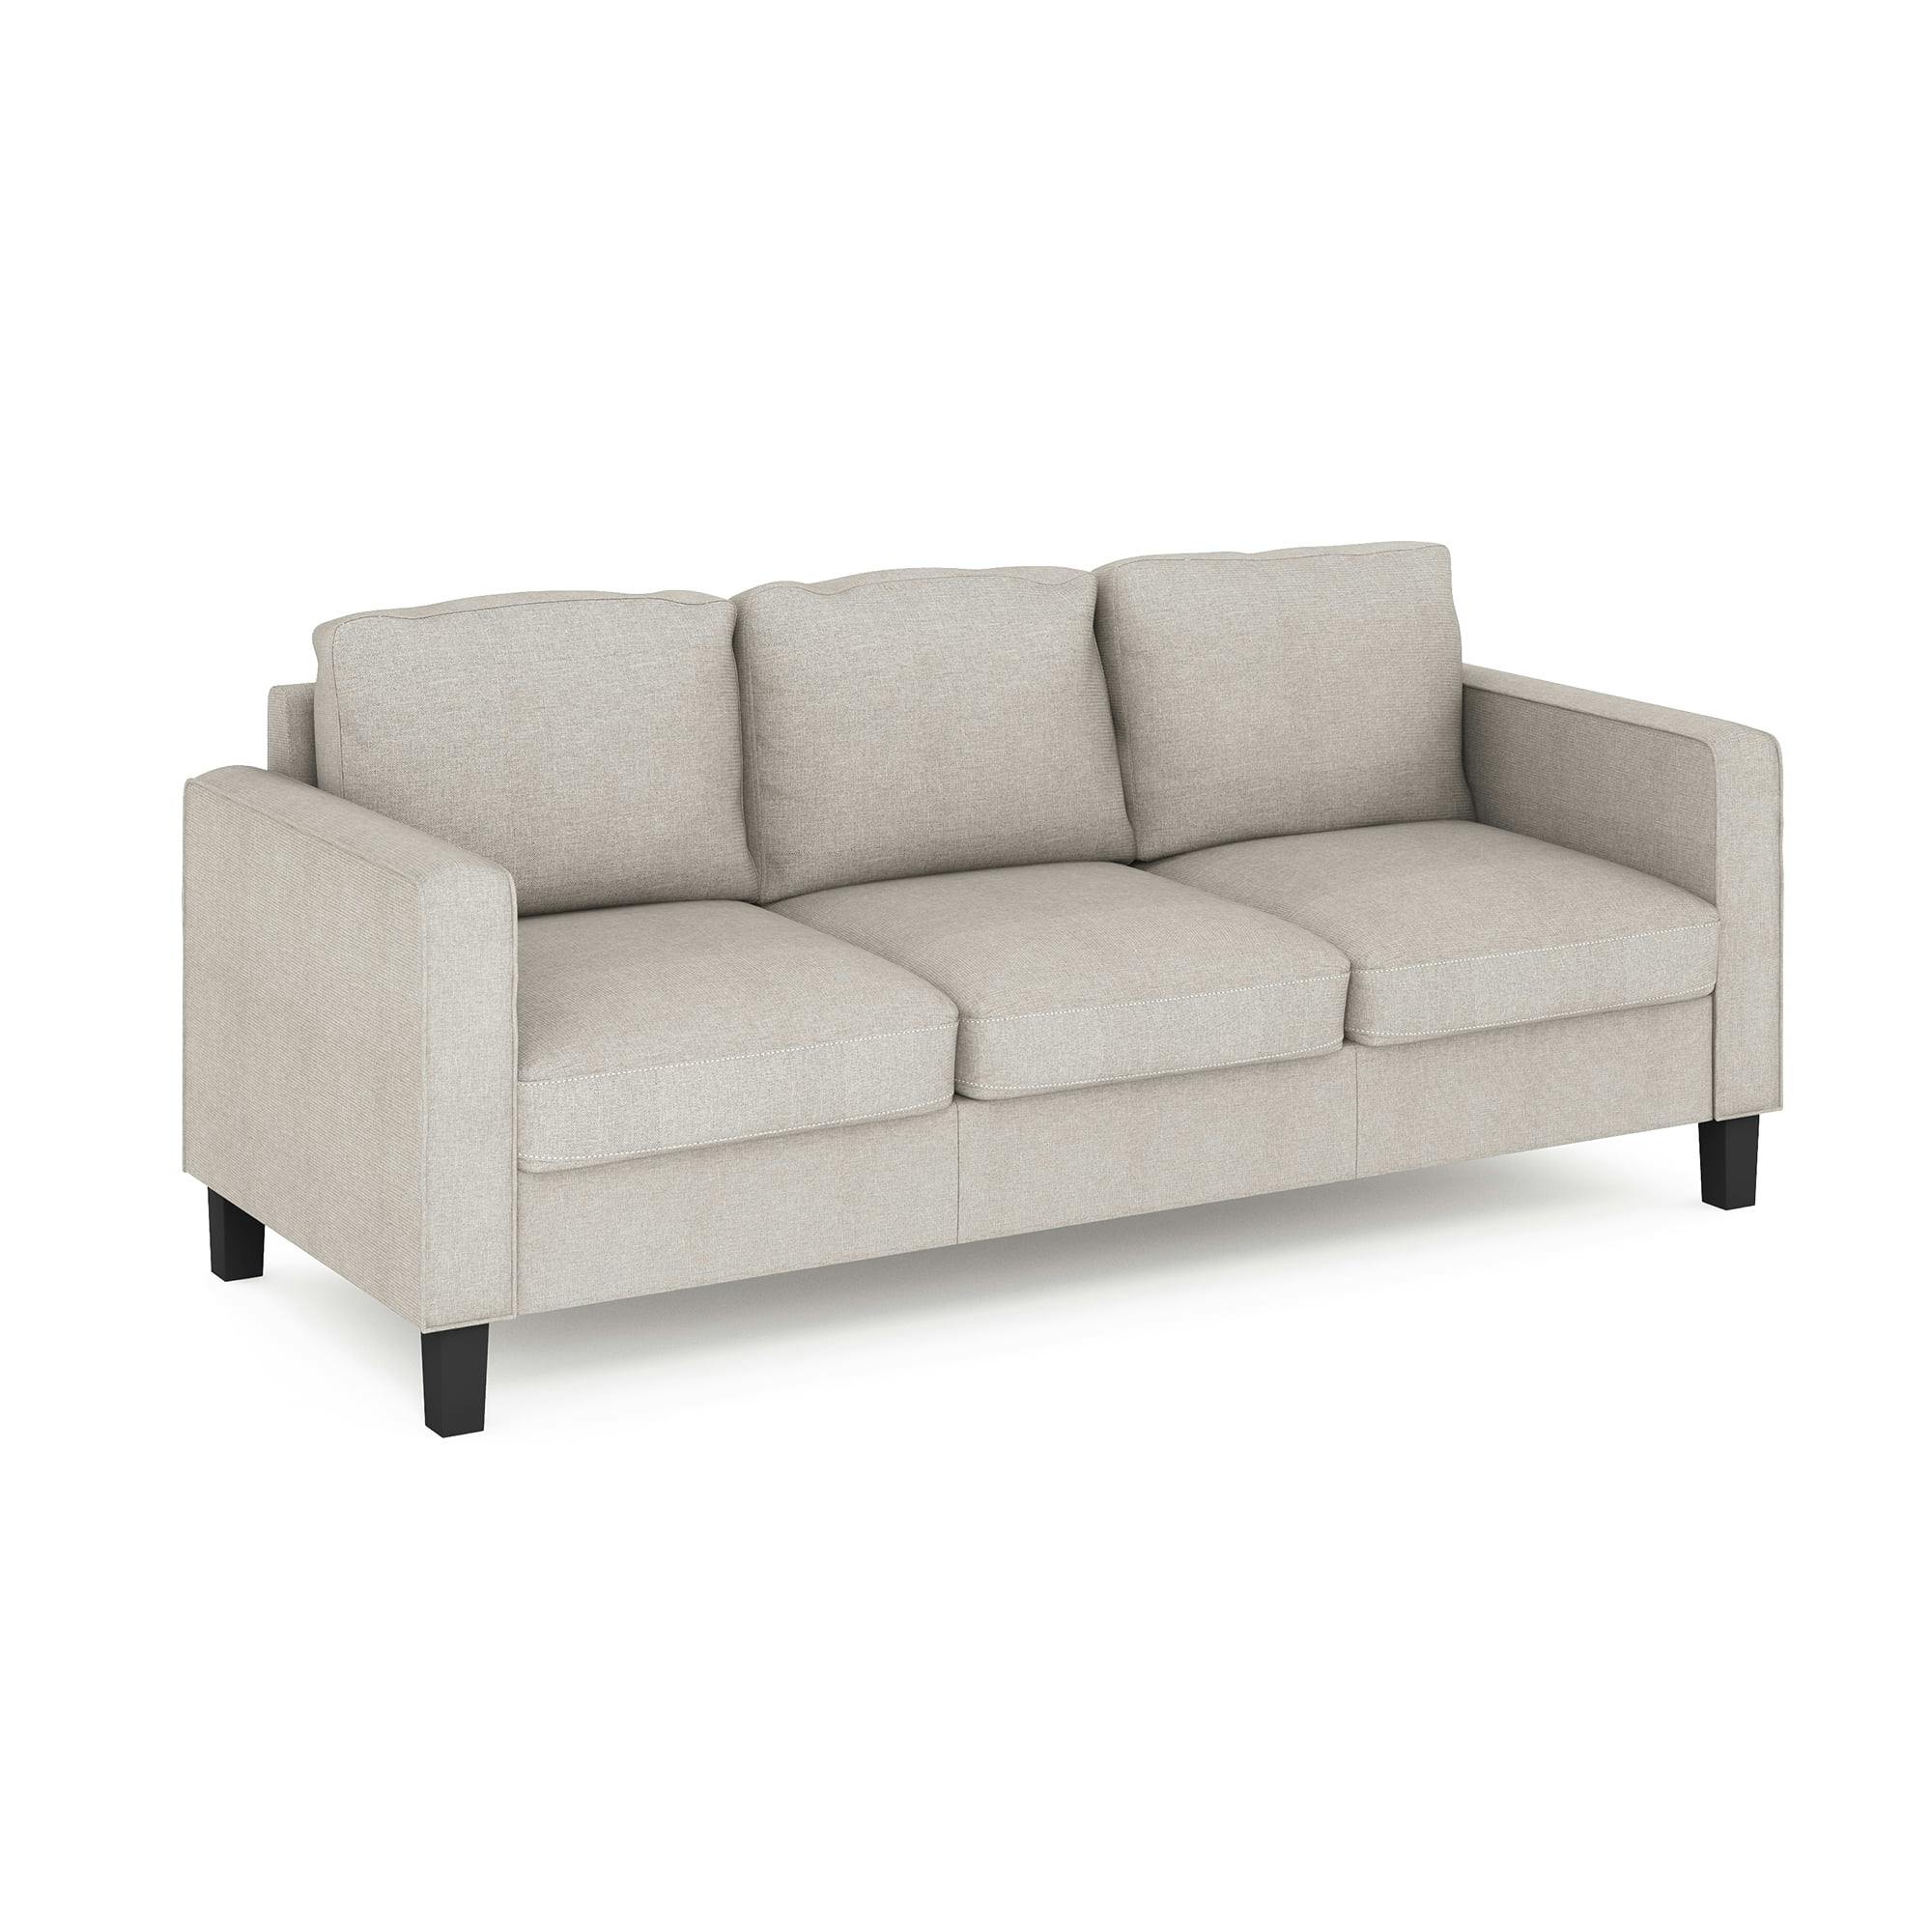 Bayonne Fog Polyester Upholstered 3-Seater Lawson Sofa with Wooden Legs